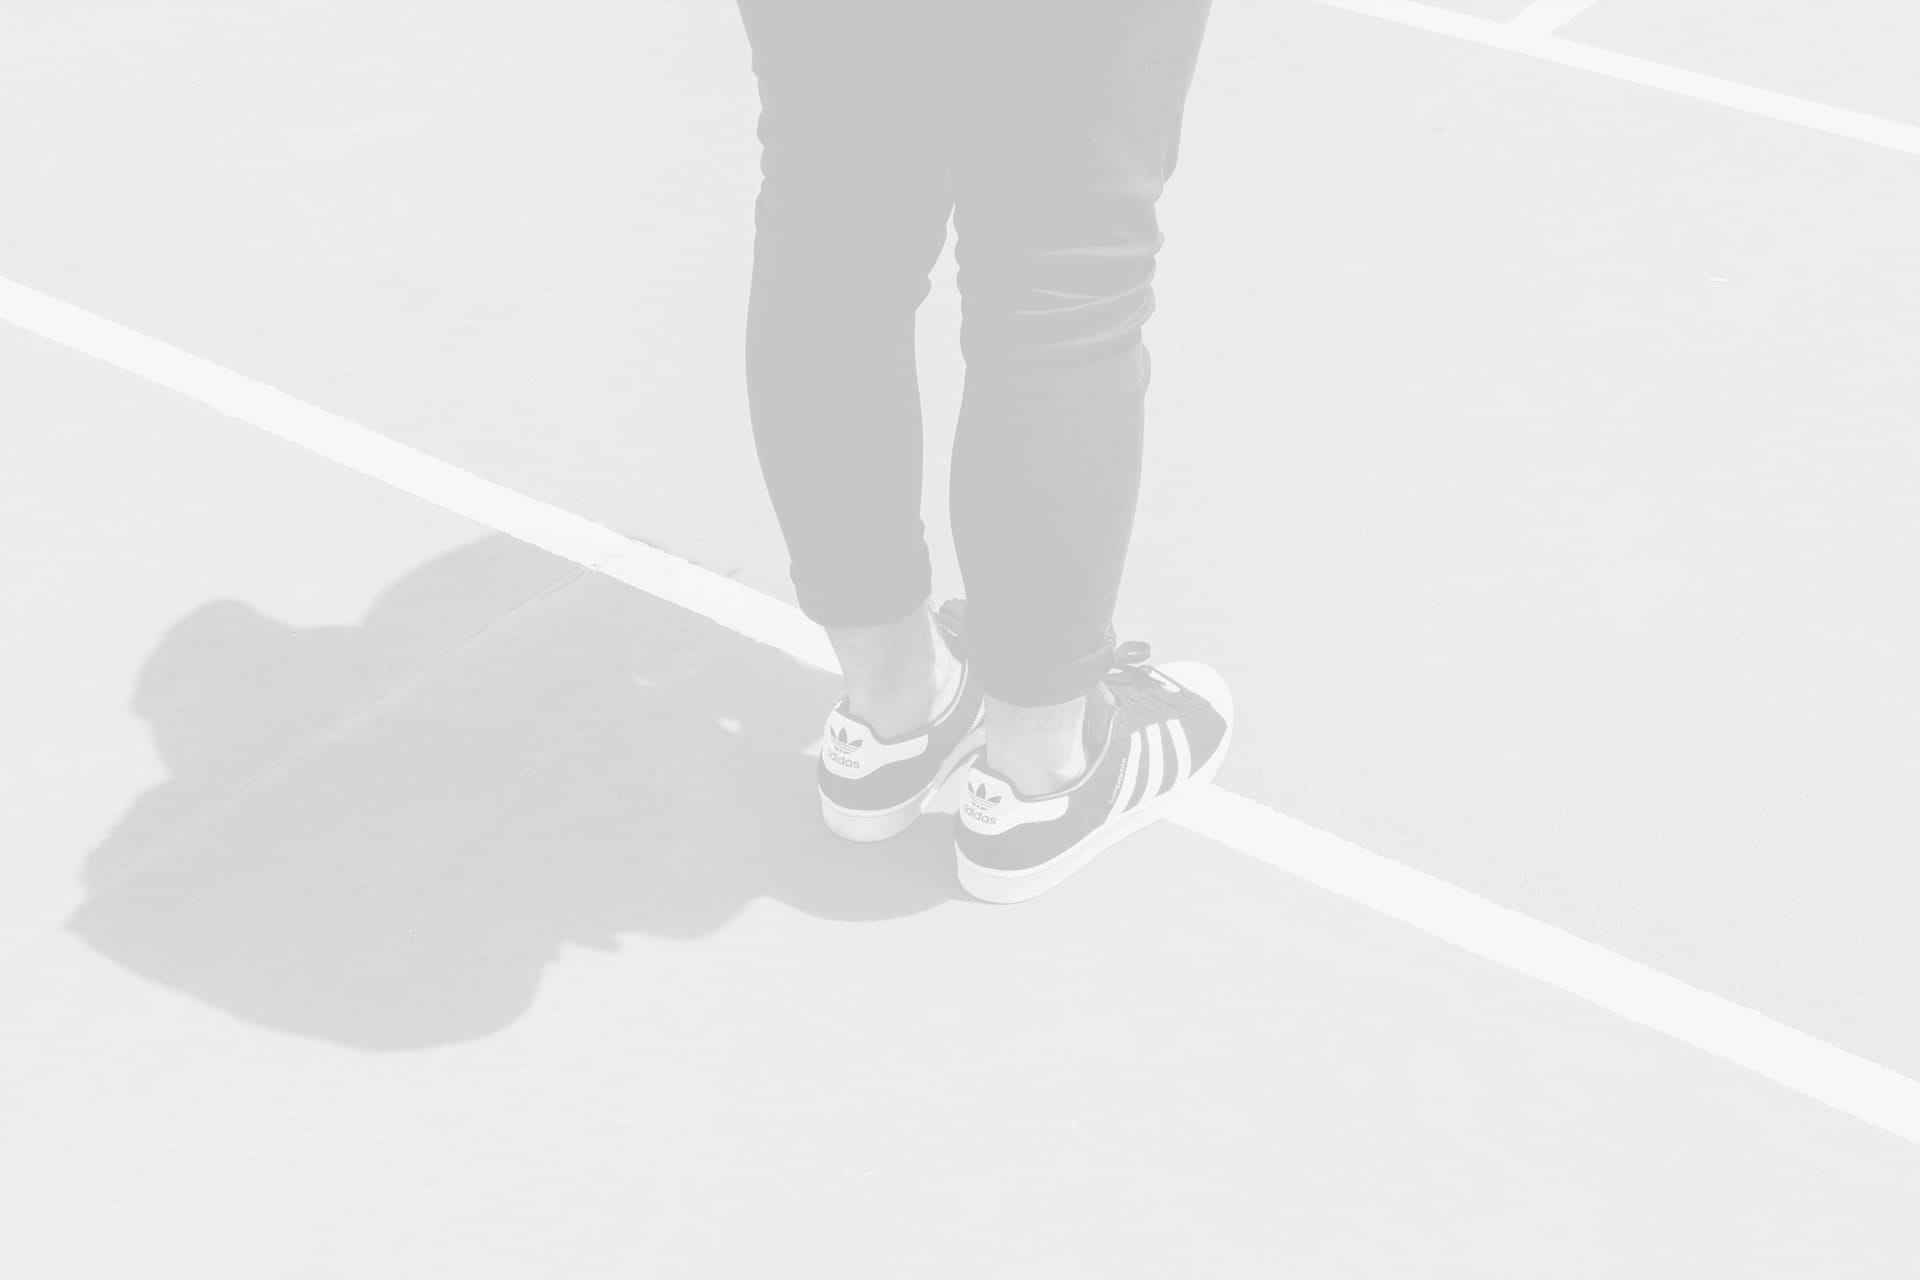 A person standing on top of a tennis court.